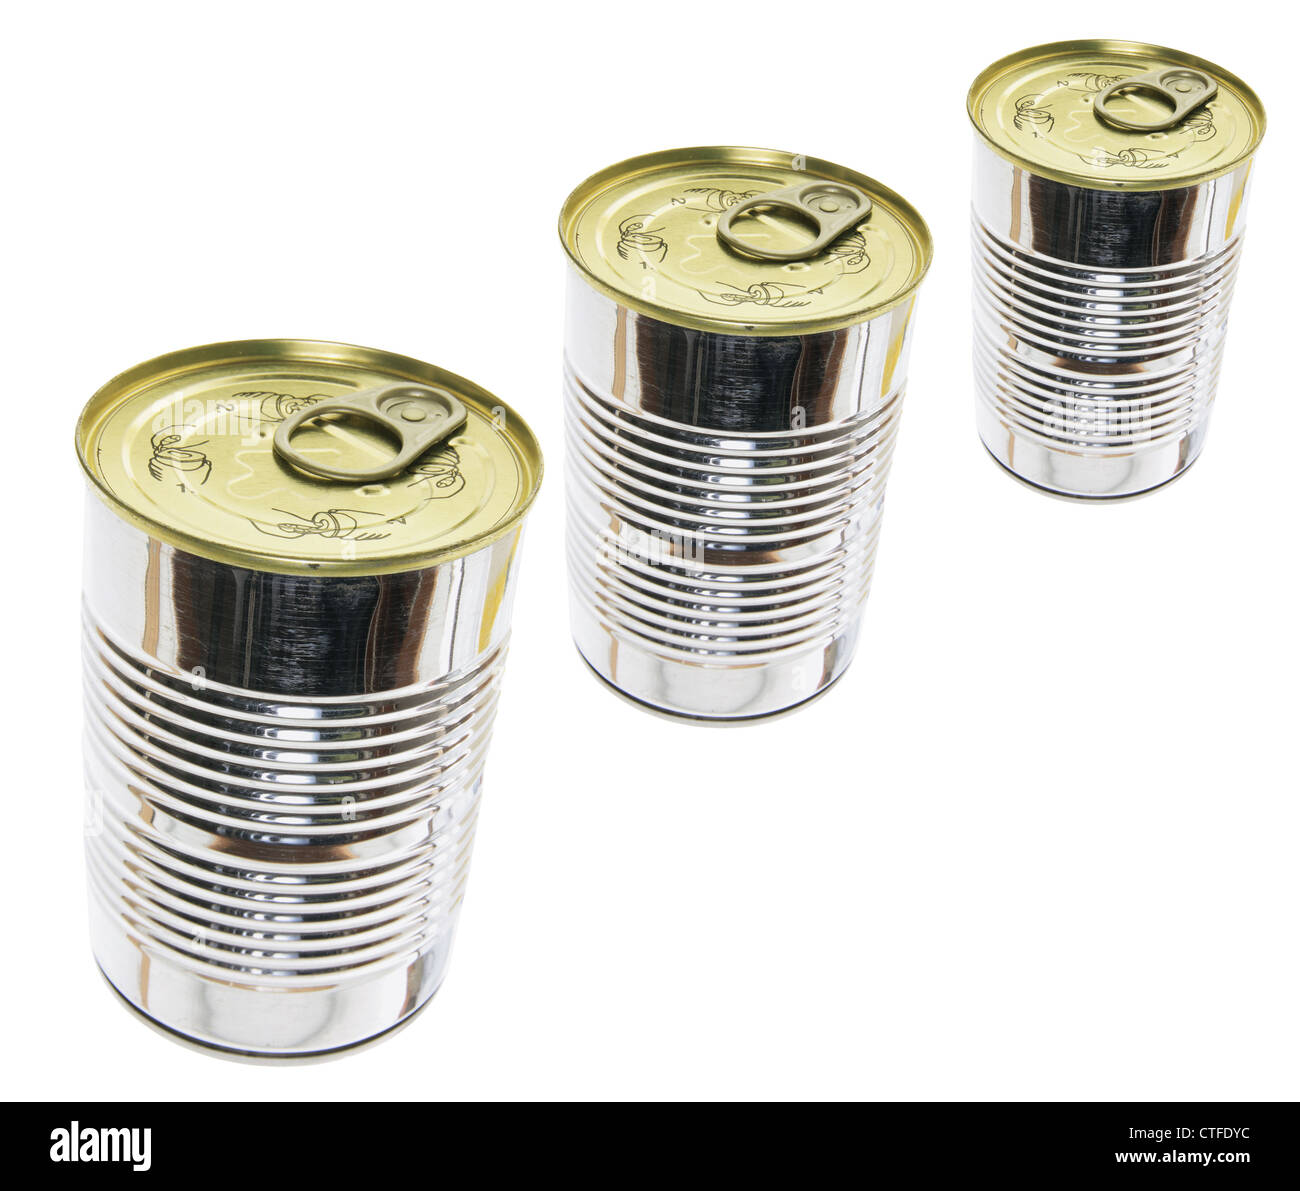 Row of Canned Food Stock Photo